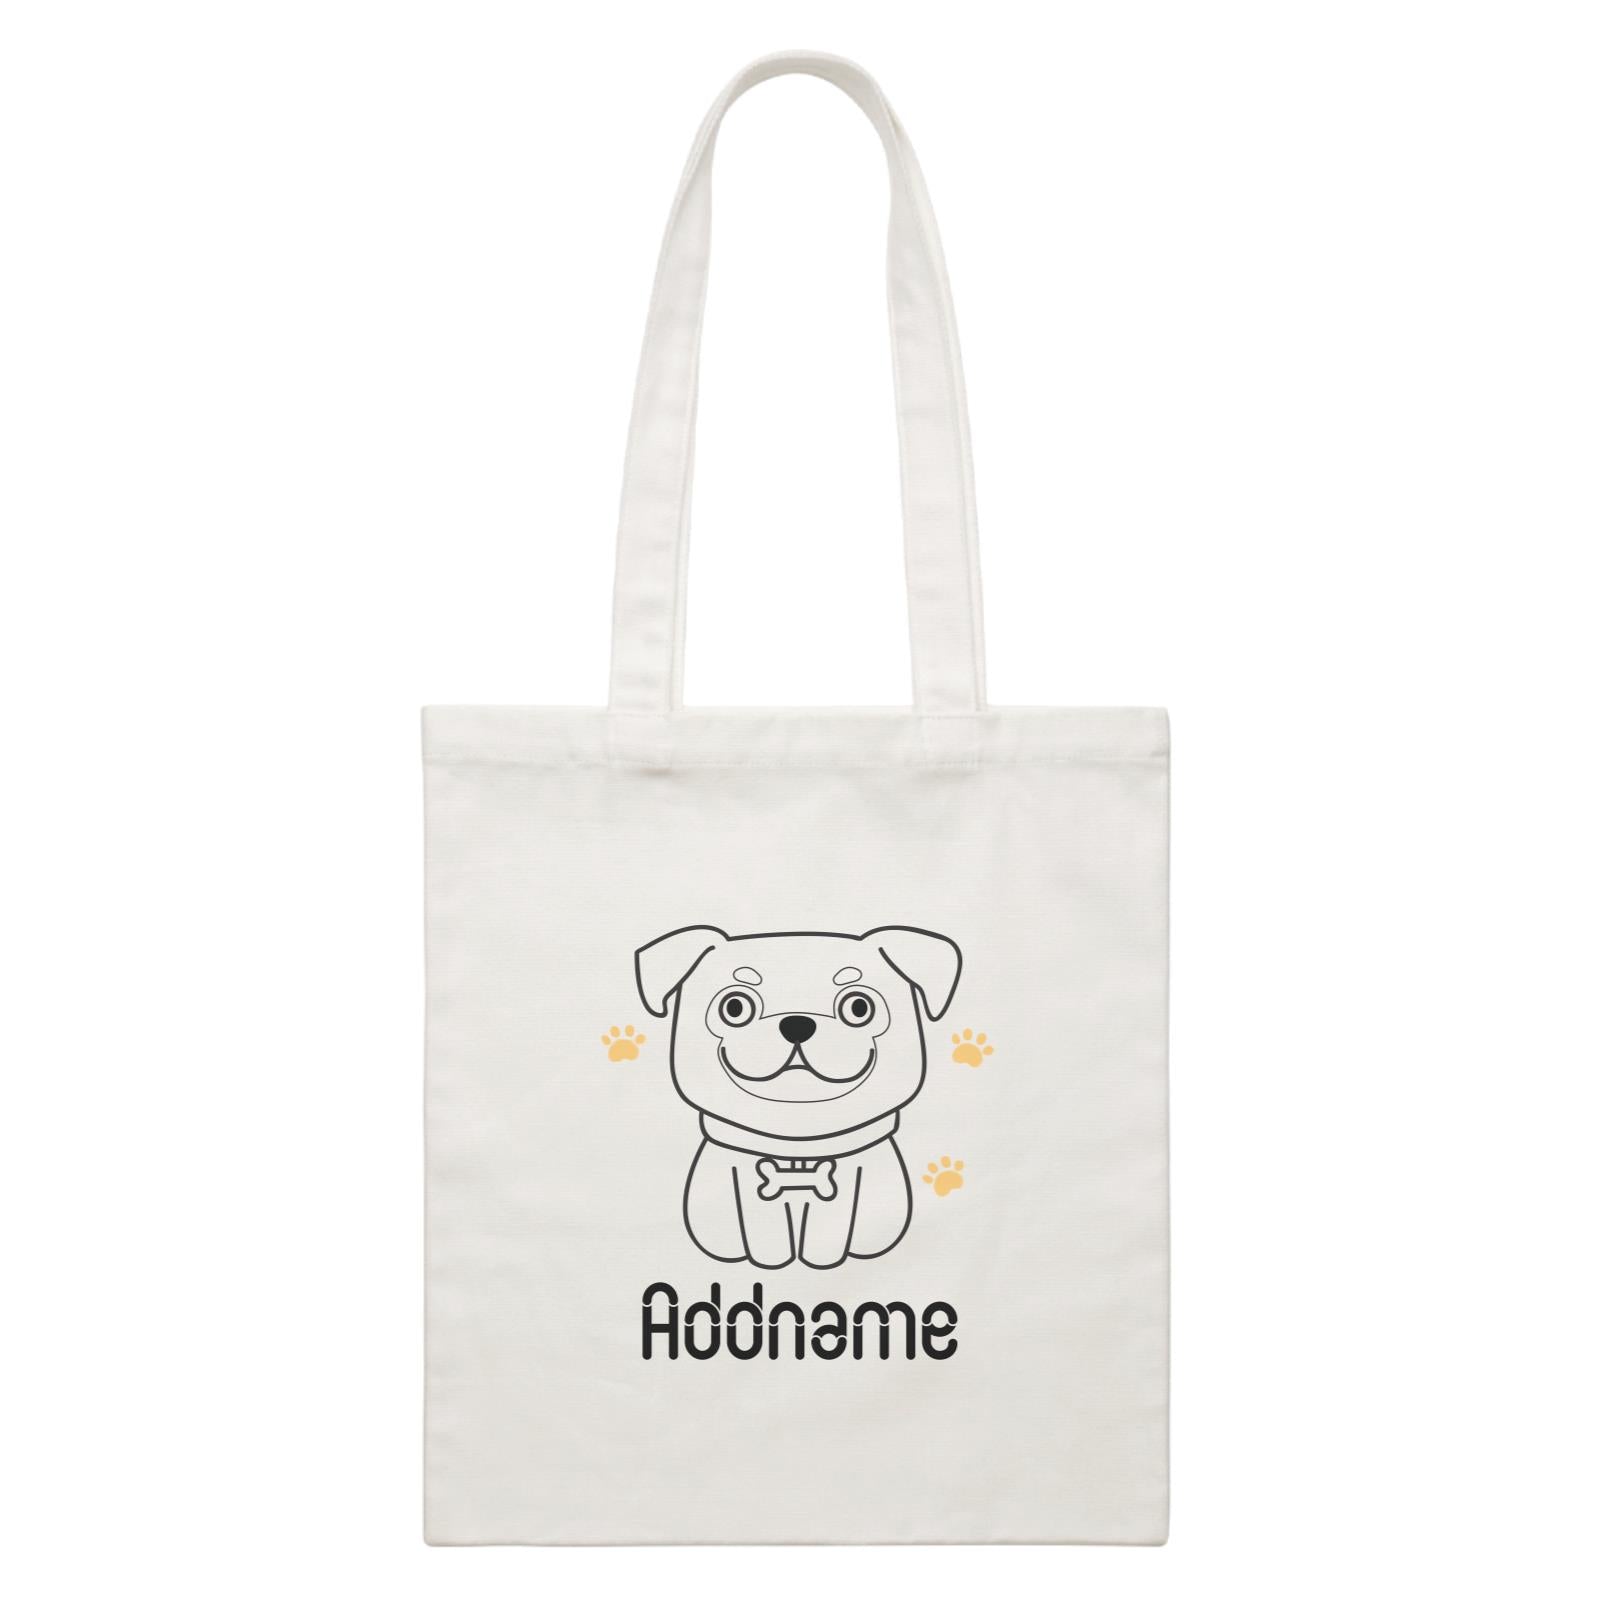 Coloring Outline Cute Hand Drawn Animals Dogs Pug Addname White White Canvas Bag